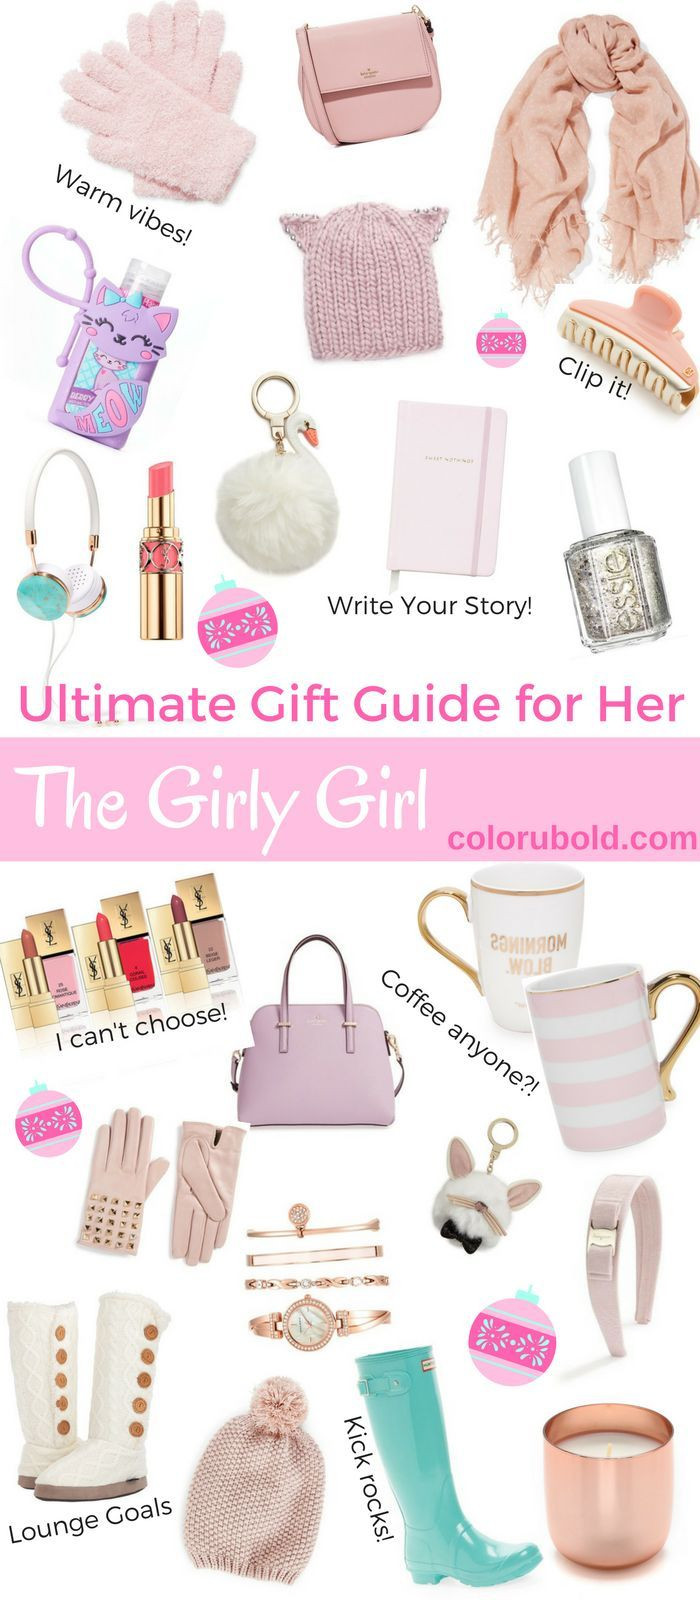 Birthday Gifts For A Girl
 The Ultimate Gift Guide for the Girly Girl